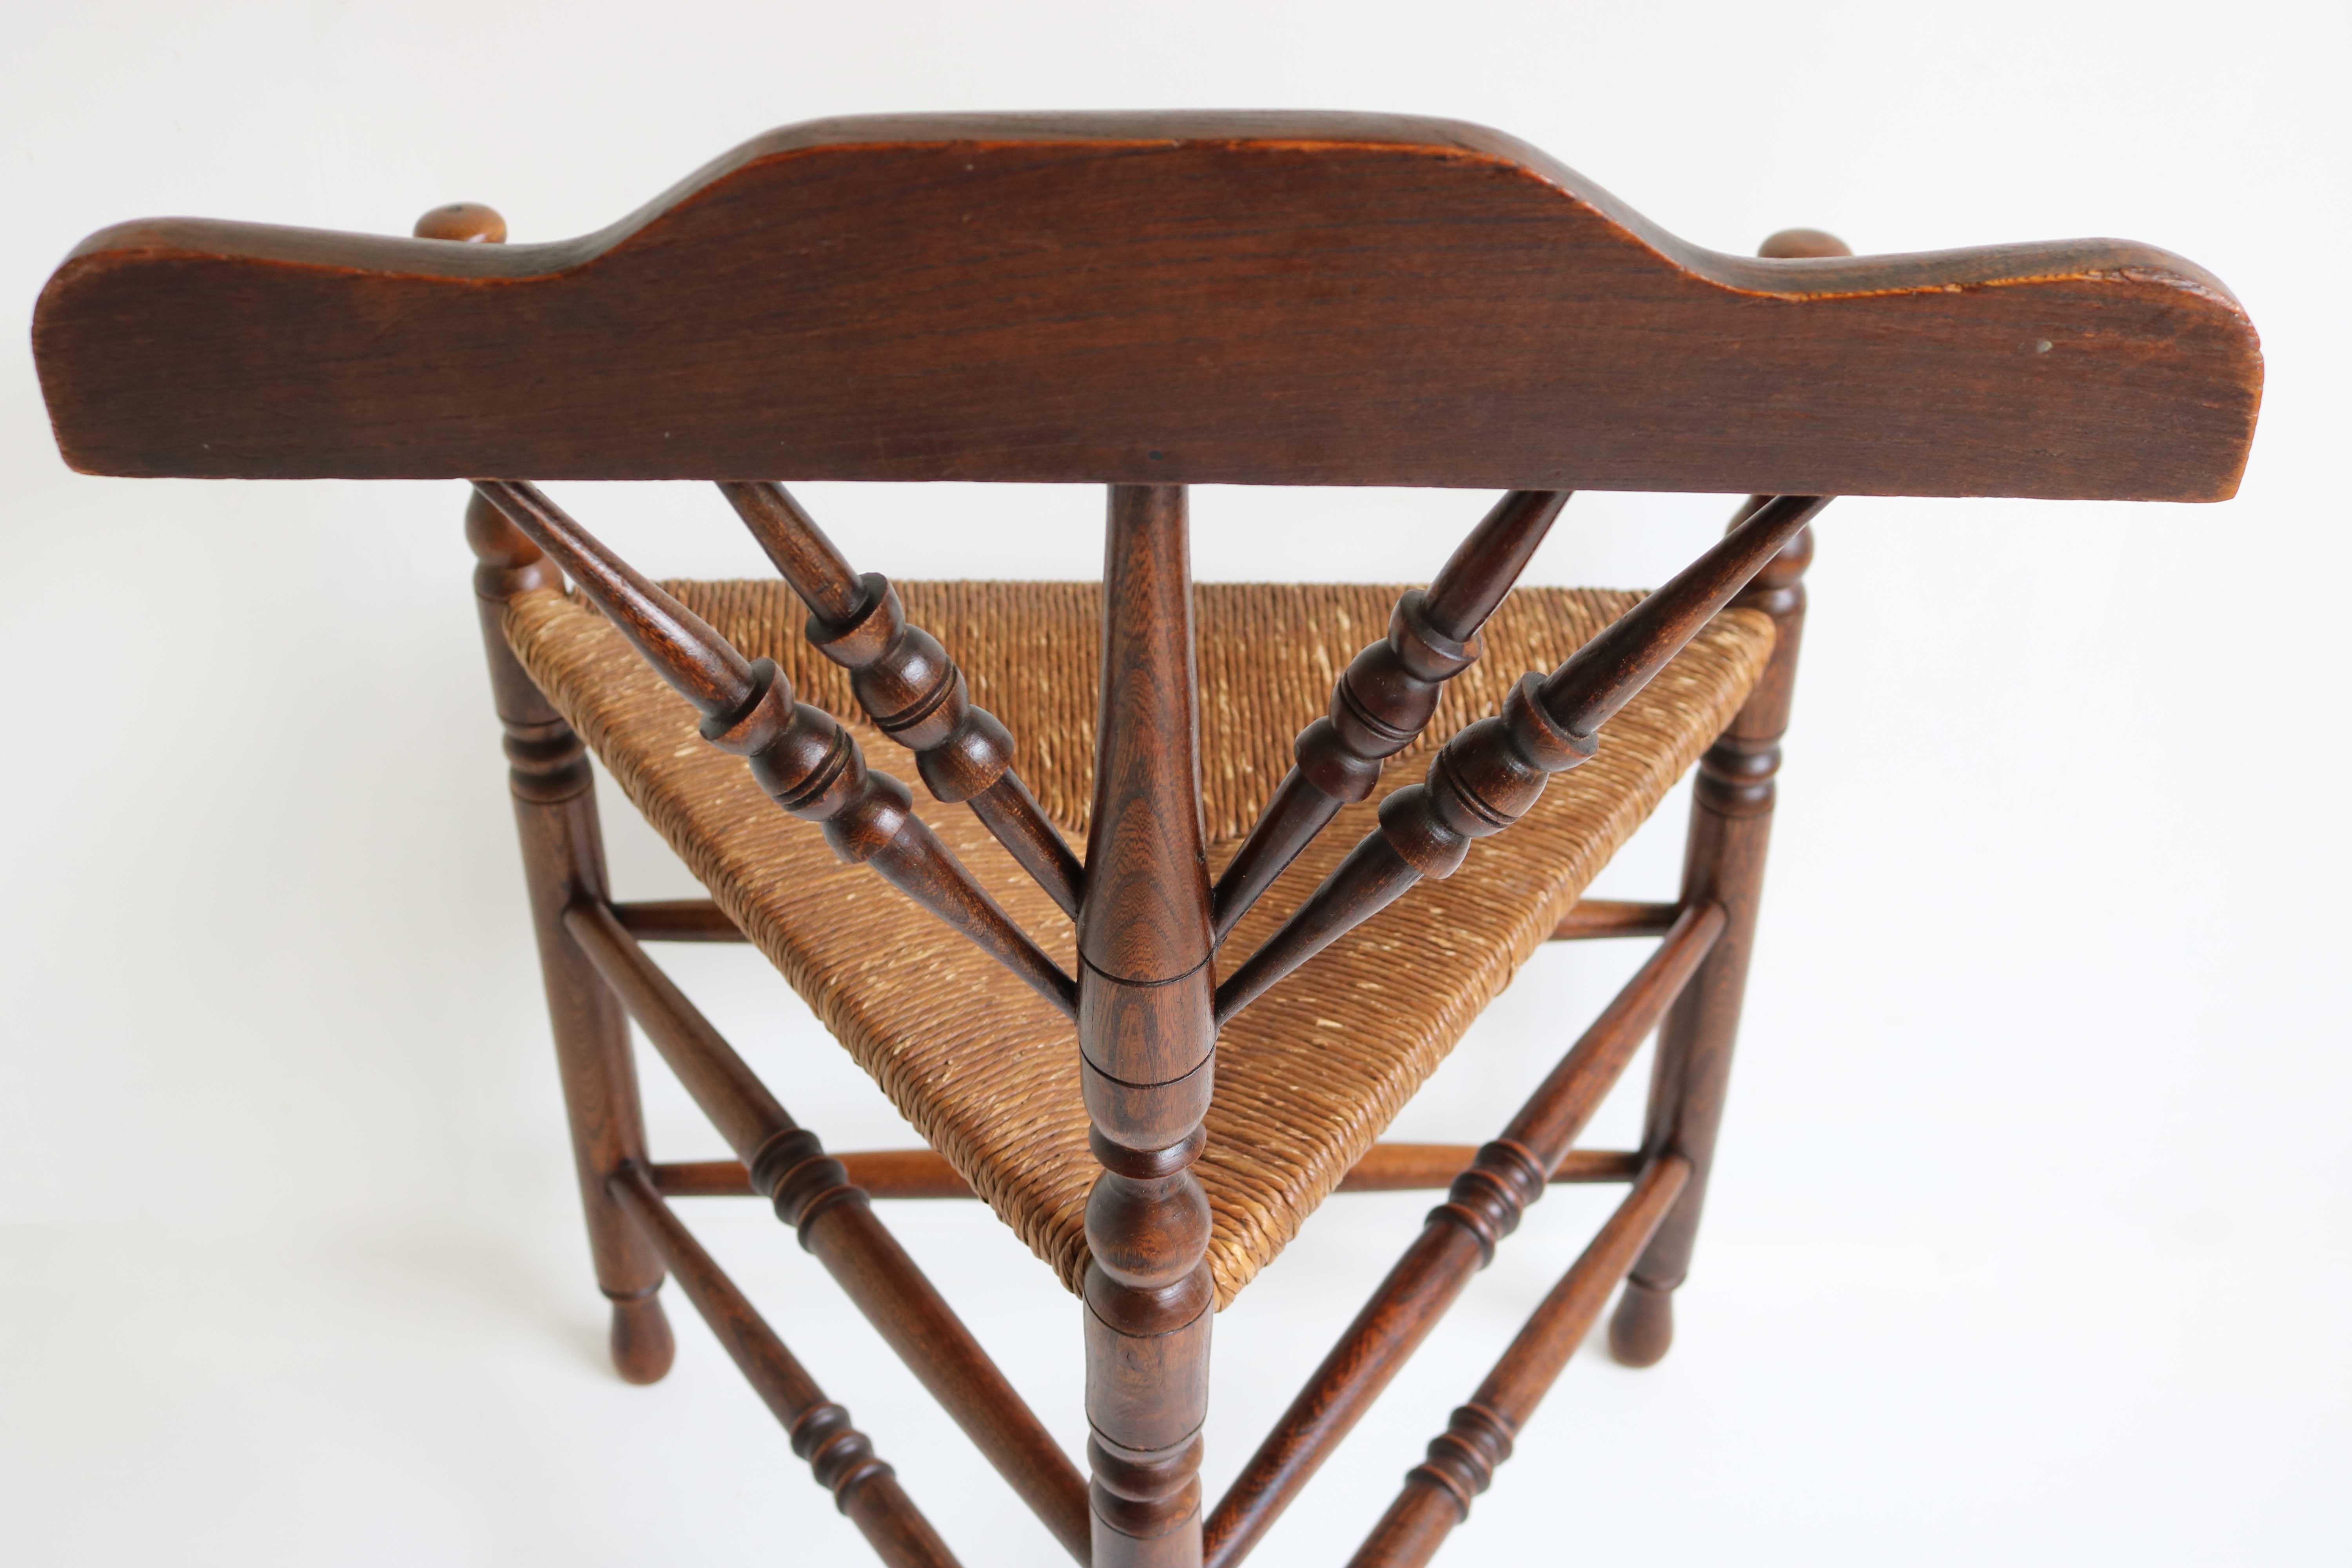 Antique Edwardian Style Triangular Corner Chair Rush Seat Knitting Armchair 1900 For Sale 1